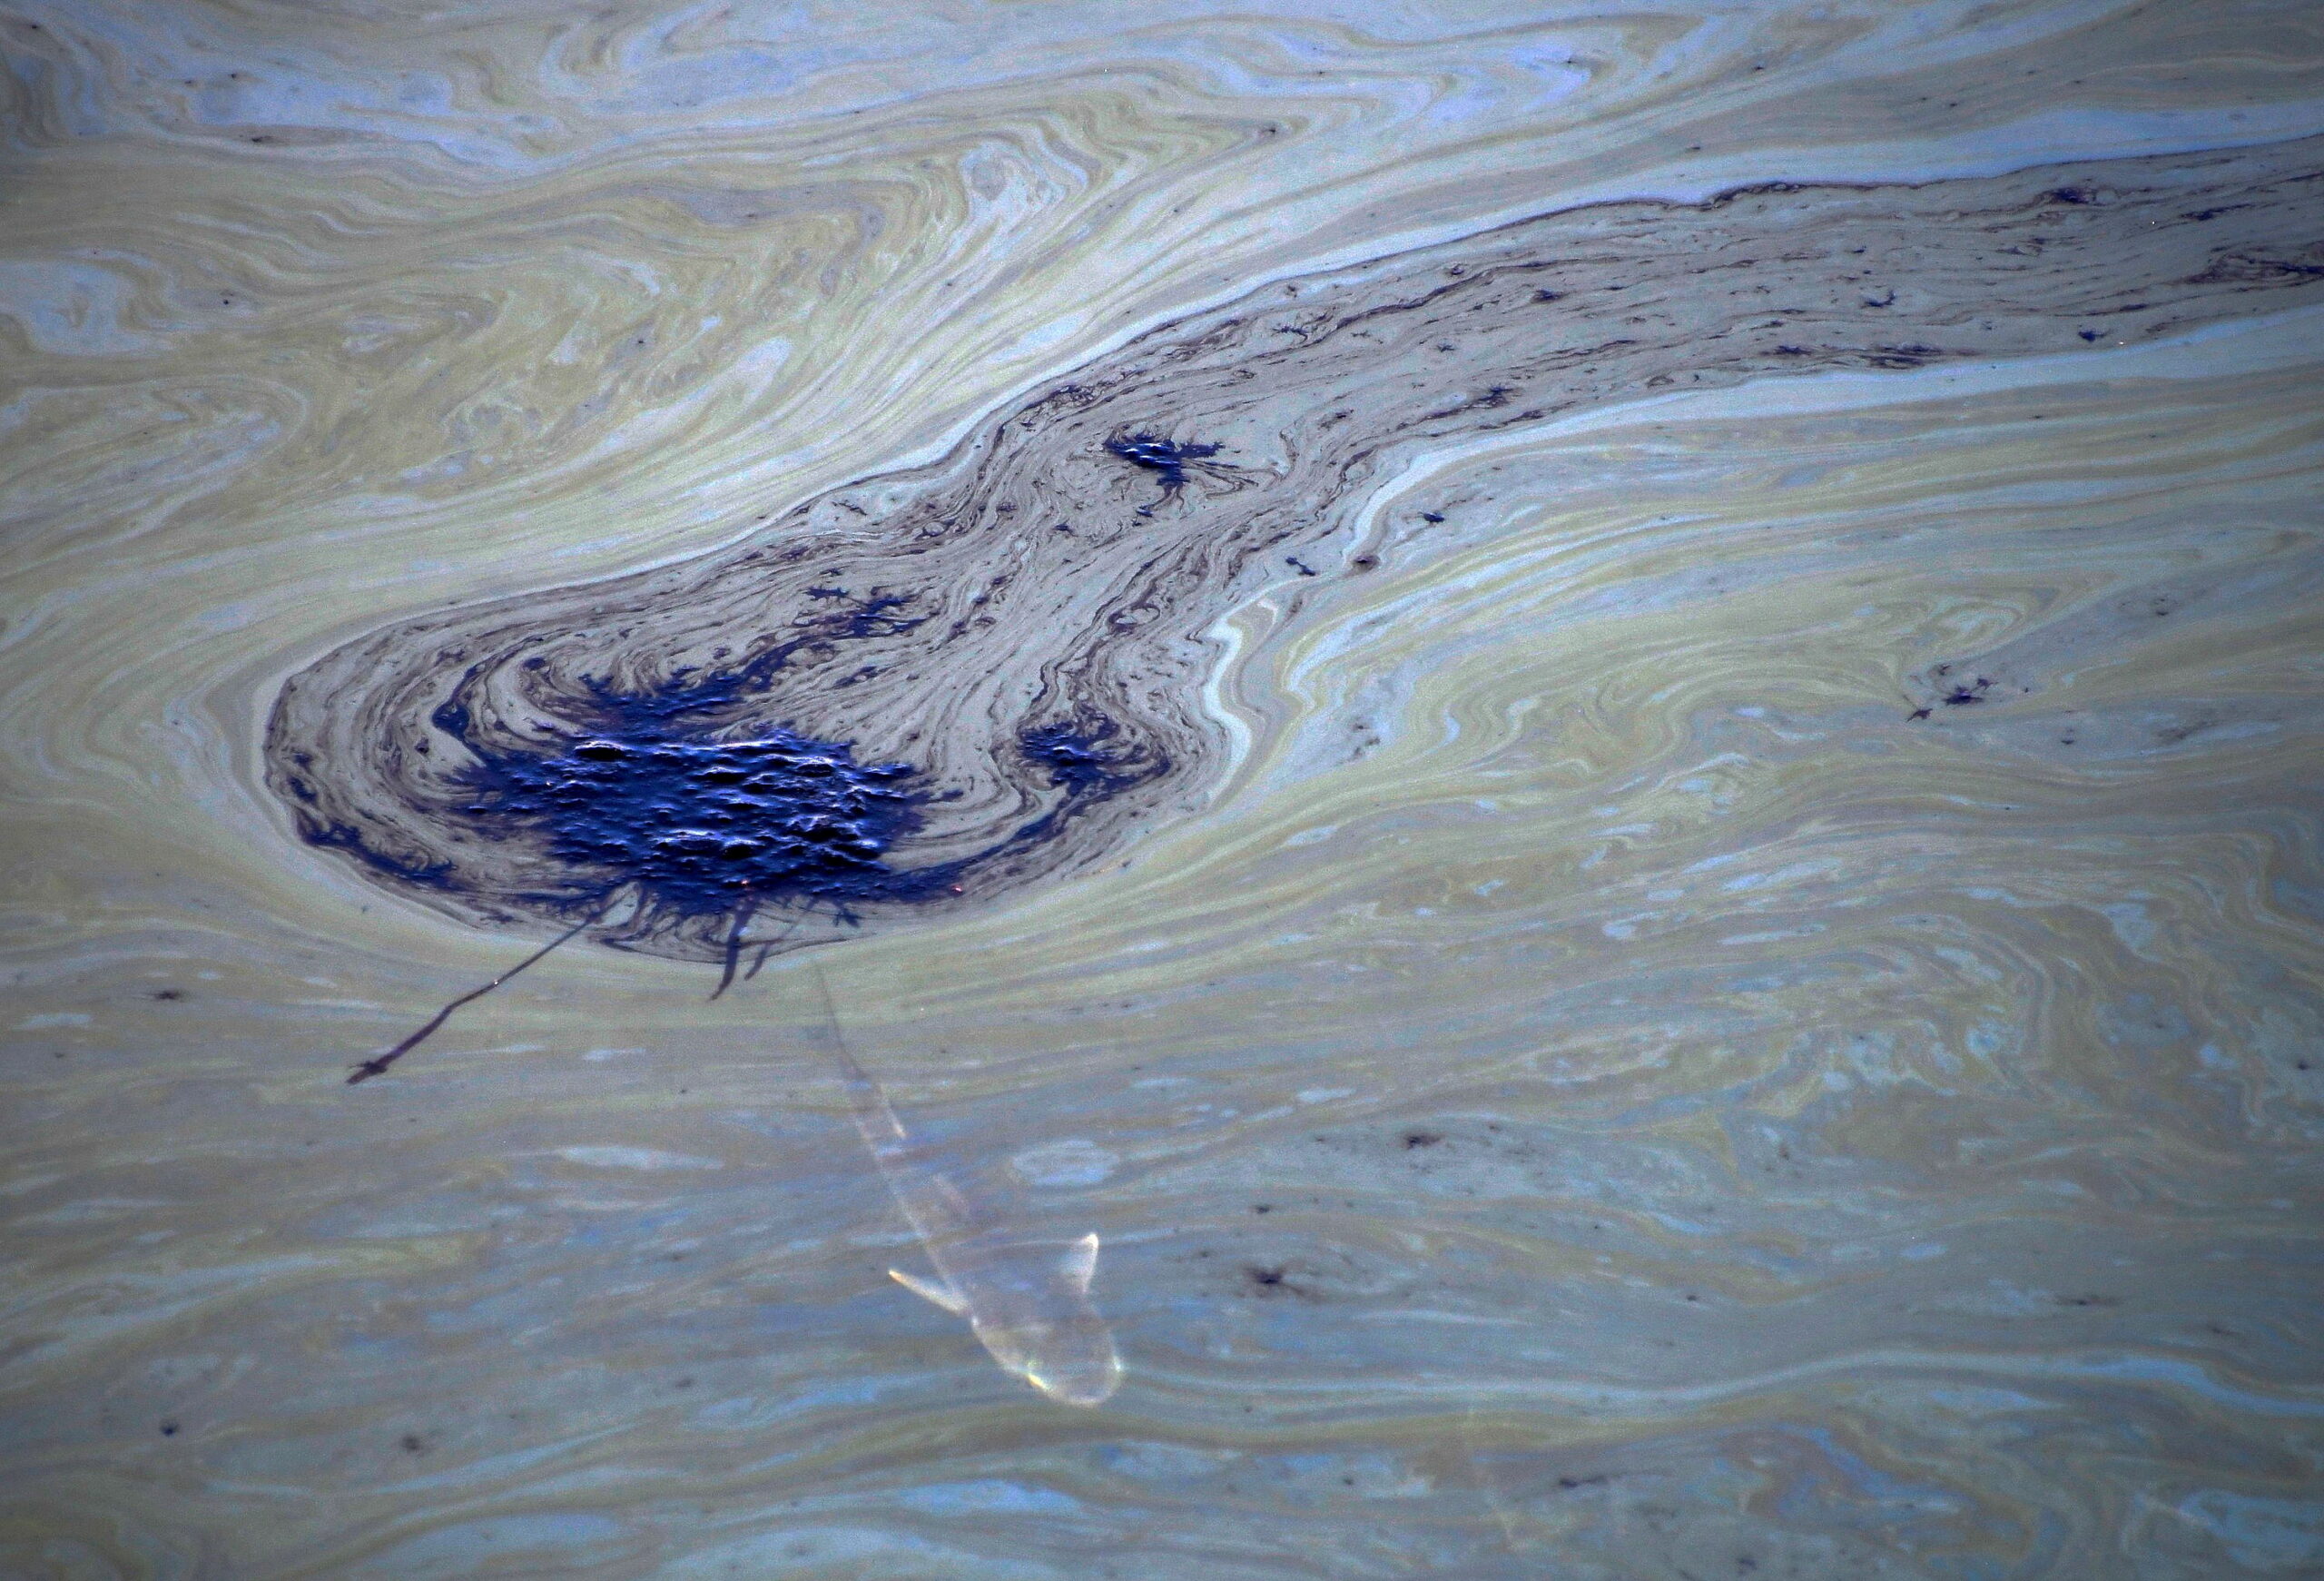 aerial shot of a fish swimming underneath the massive oil spill in Southern California